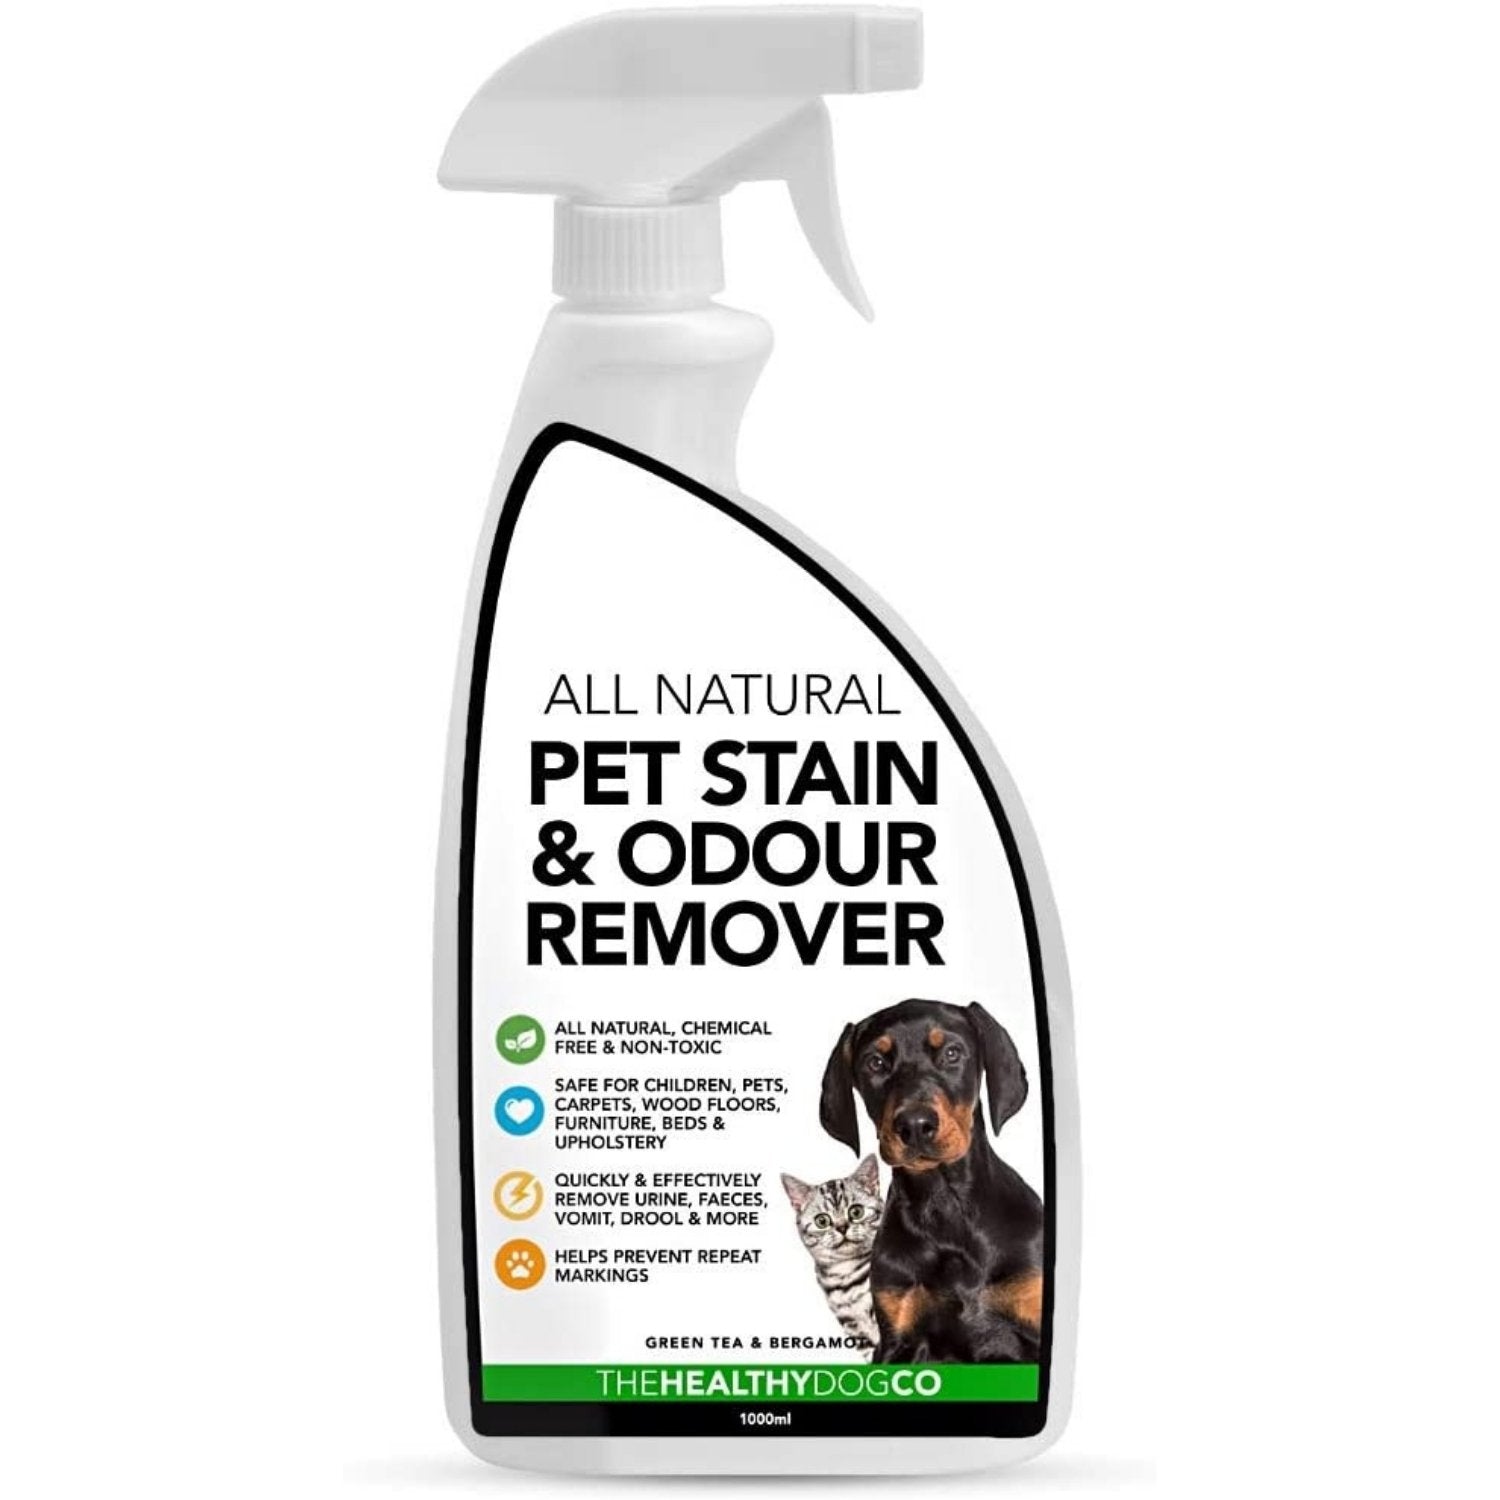 All-Natural Pet Stain and Odour Remover - The Healthy Dog Co